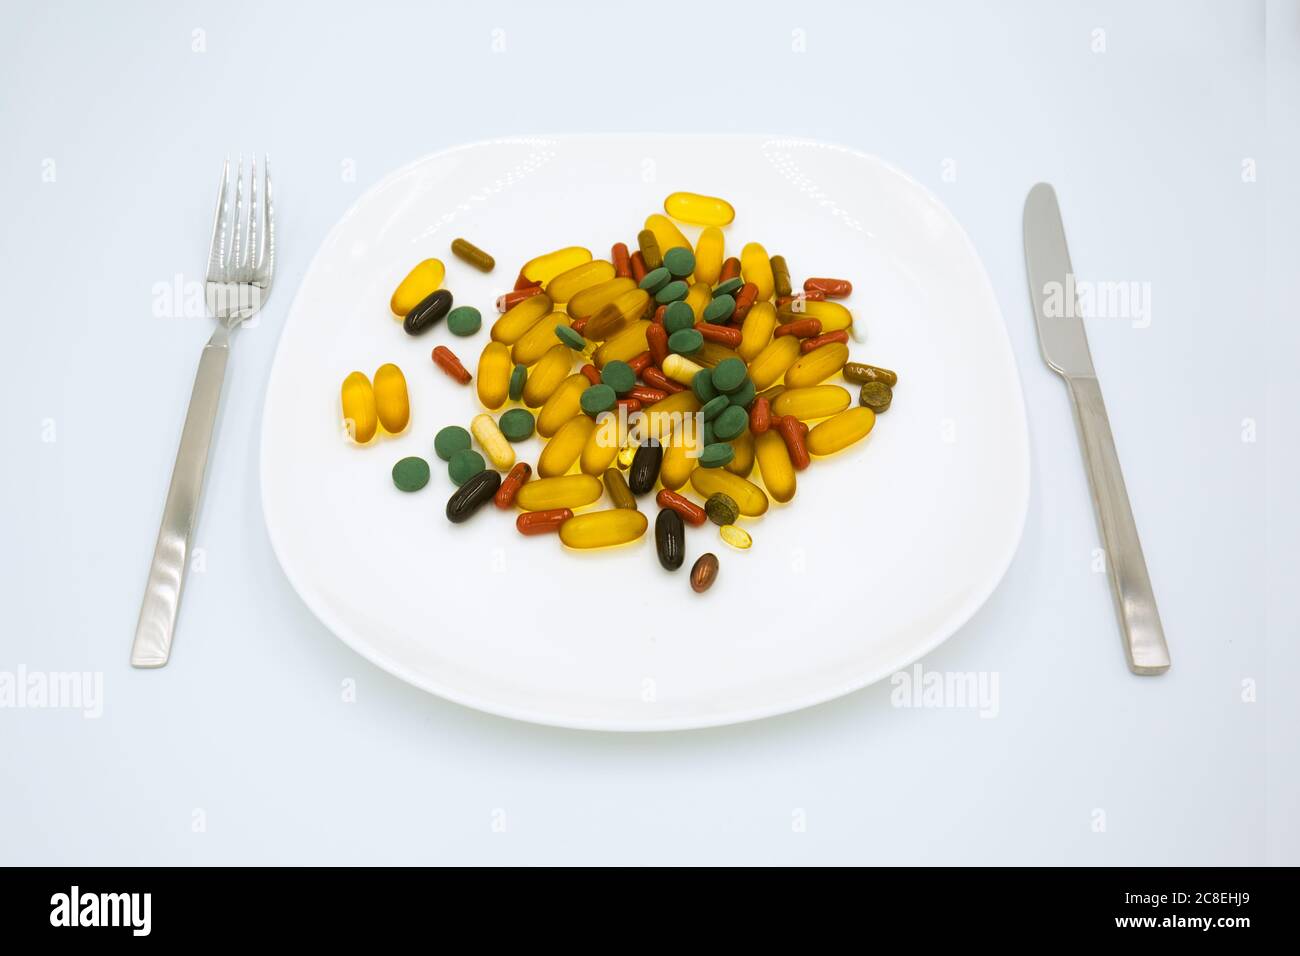 Many different weight loss pills and supplements as food on white plate with fork and knife. Diet pills and supplements, prescription weight loss drug Stock Photo